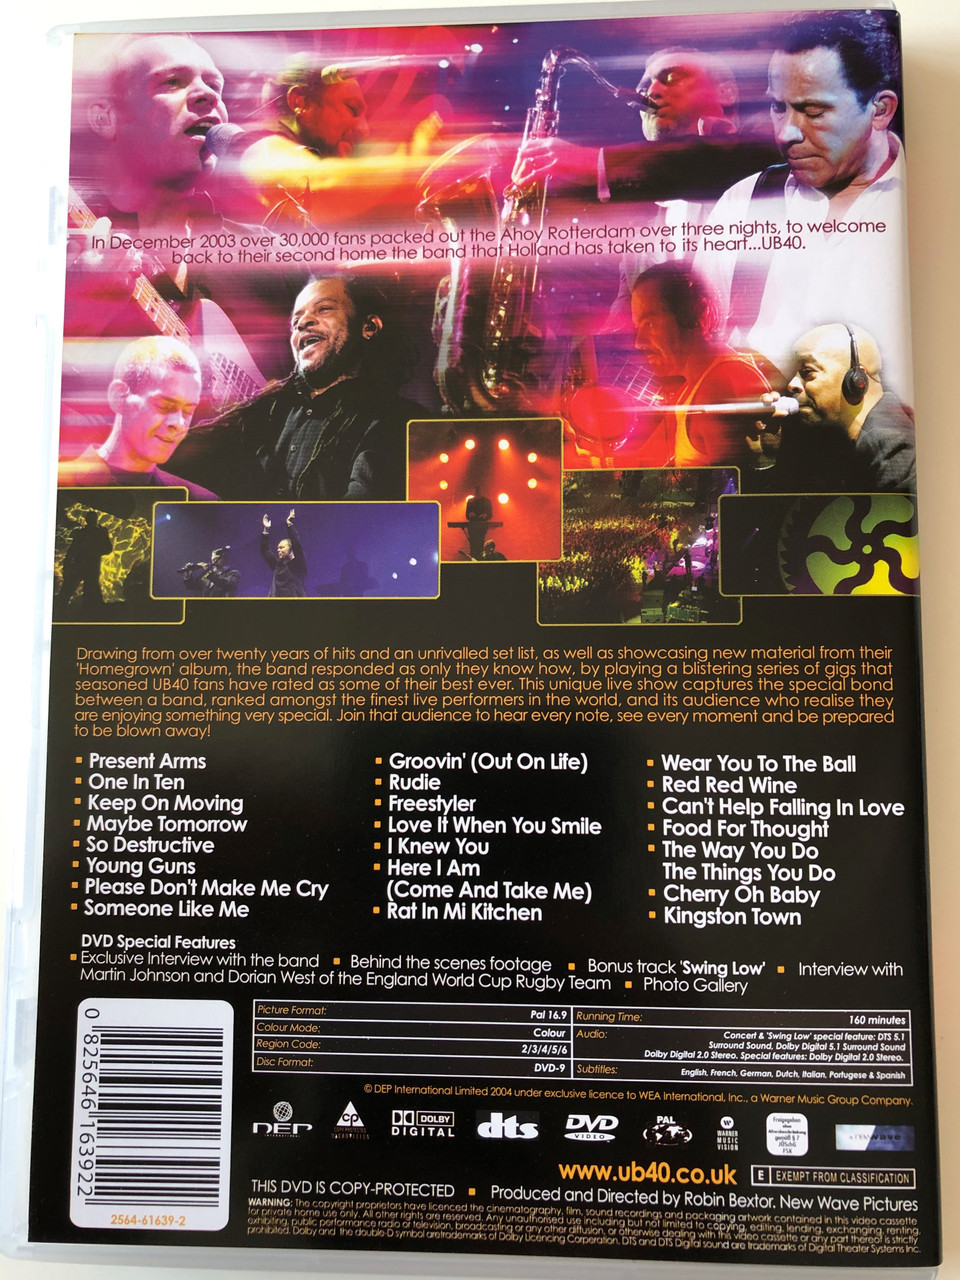 UB40 - Homegrown in Holland LIVE DVD 2004 / Present Arms, Maybe TOmorrow,  Someone Like me, Red Red Wine, Kingston Town / Interview, Behind the  Scenes, Bonus Track: Swing Low / Warner Music Group - bibleinmylanguage